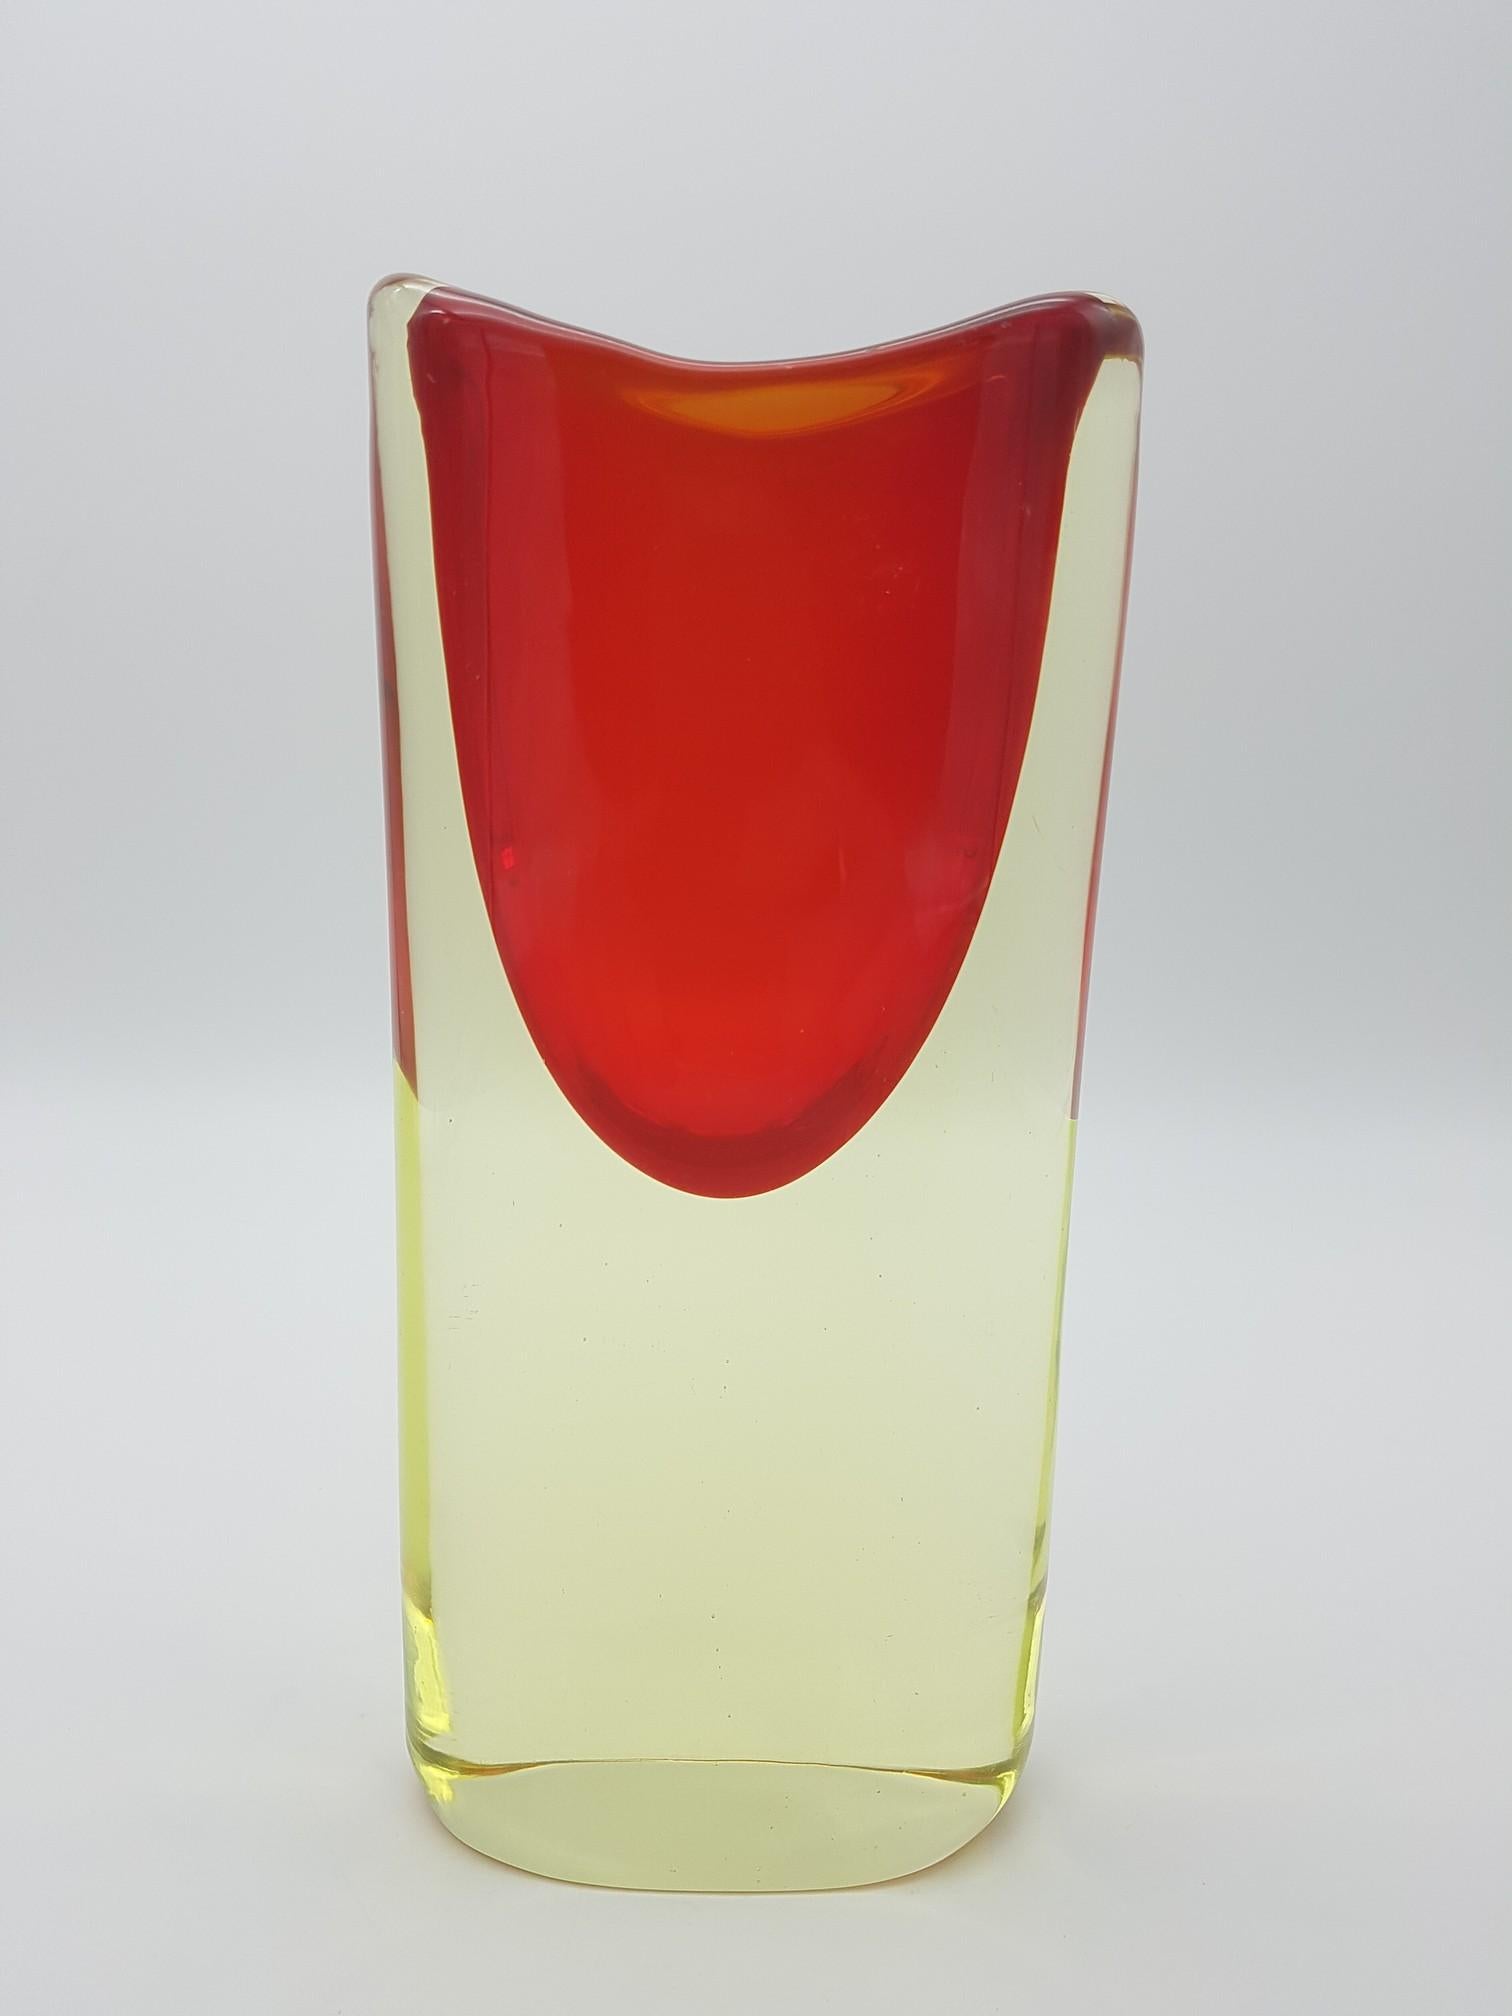 This modern and elegant Murano glass vase has been hand-made by the Gino Cenedese e Figlio glass-factory in the mid-1960s, design by Antonio da Ros. The suggestive juxtaposition of yellow and red colors creates a beautiful contrast that stimulates